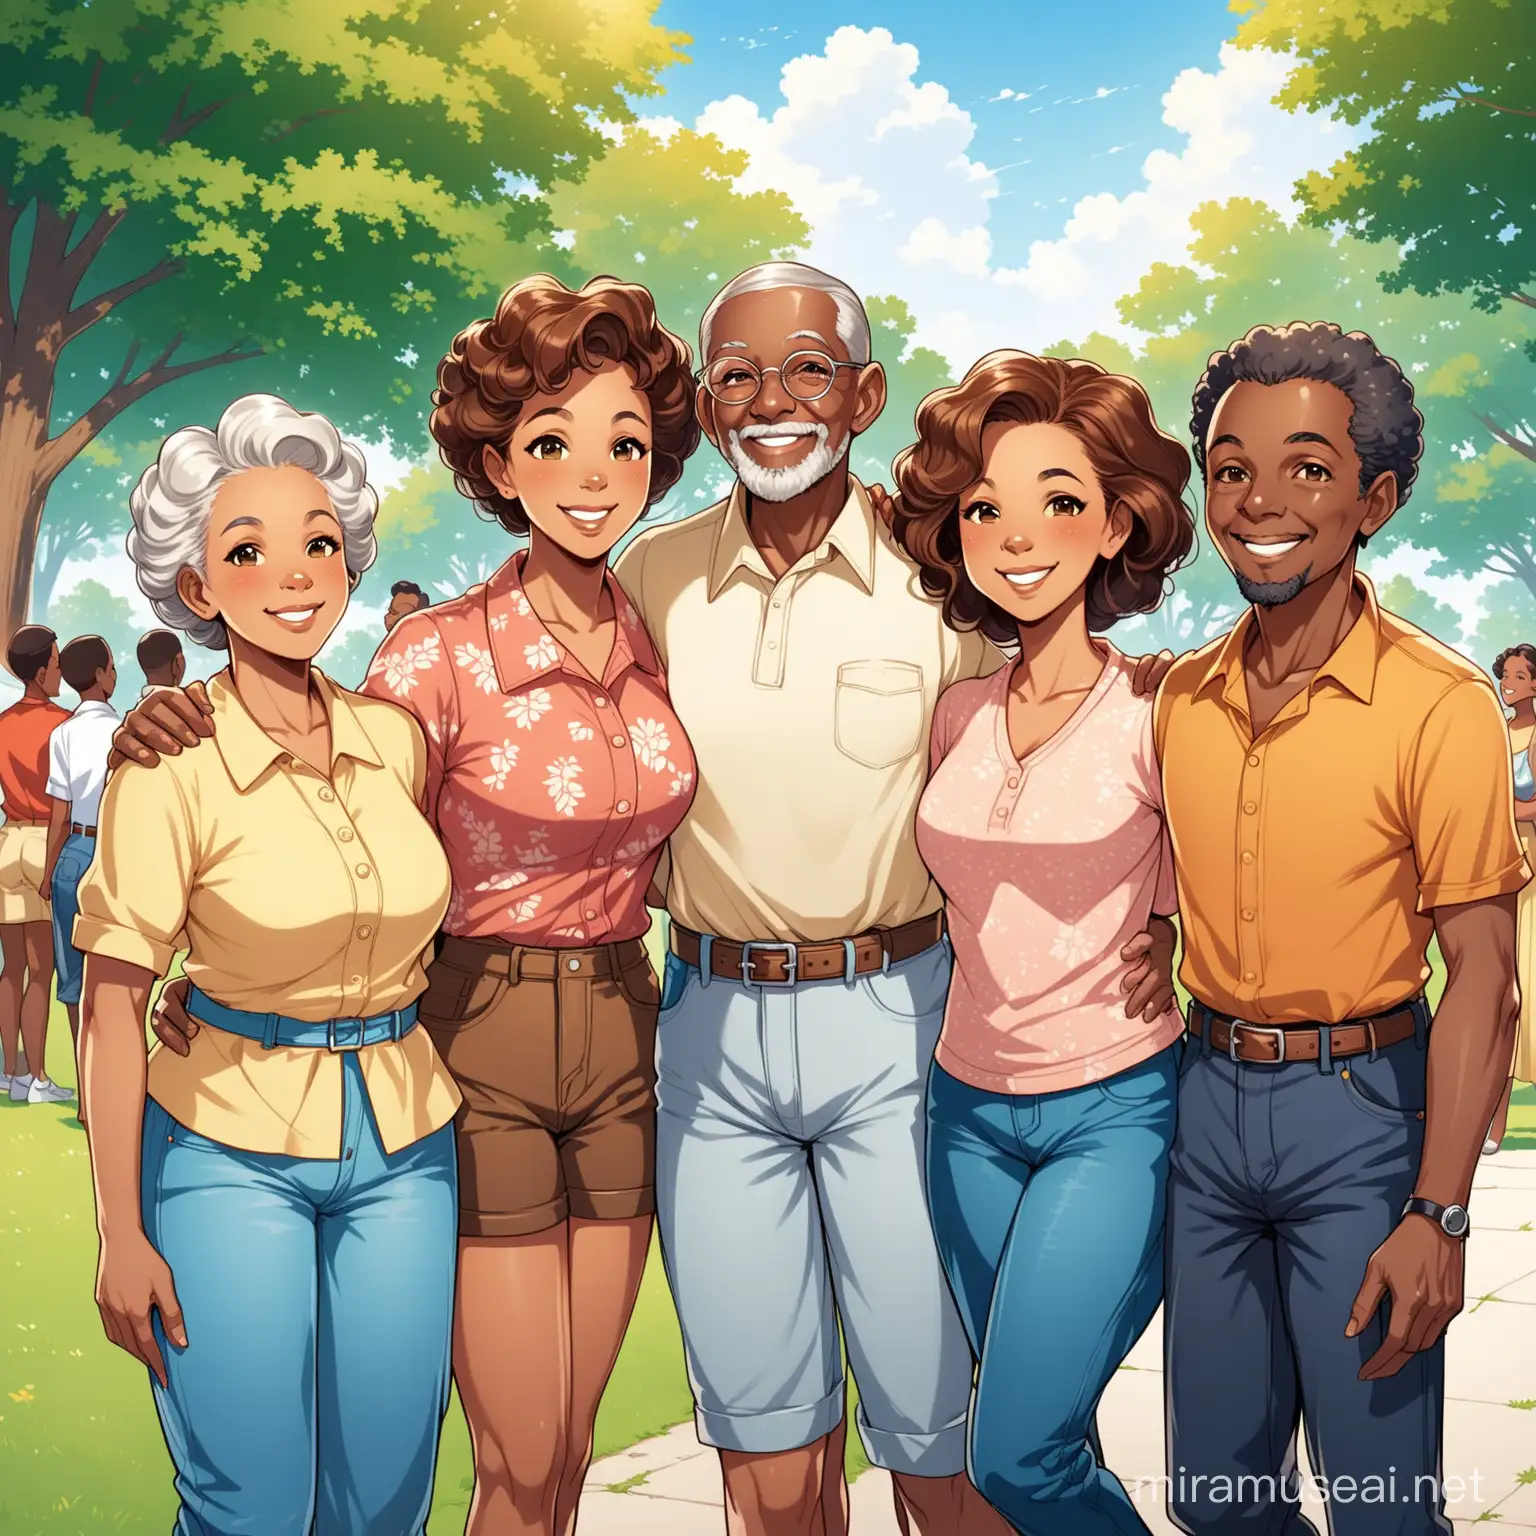 1900s cartoon-style light-skinned & dark complexion senior citizens, adults & teenager African Americans in jeans & shorts at the park for a family reunion smiling